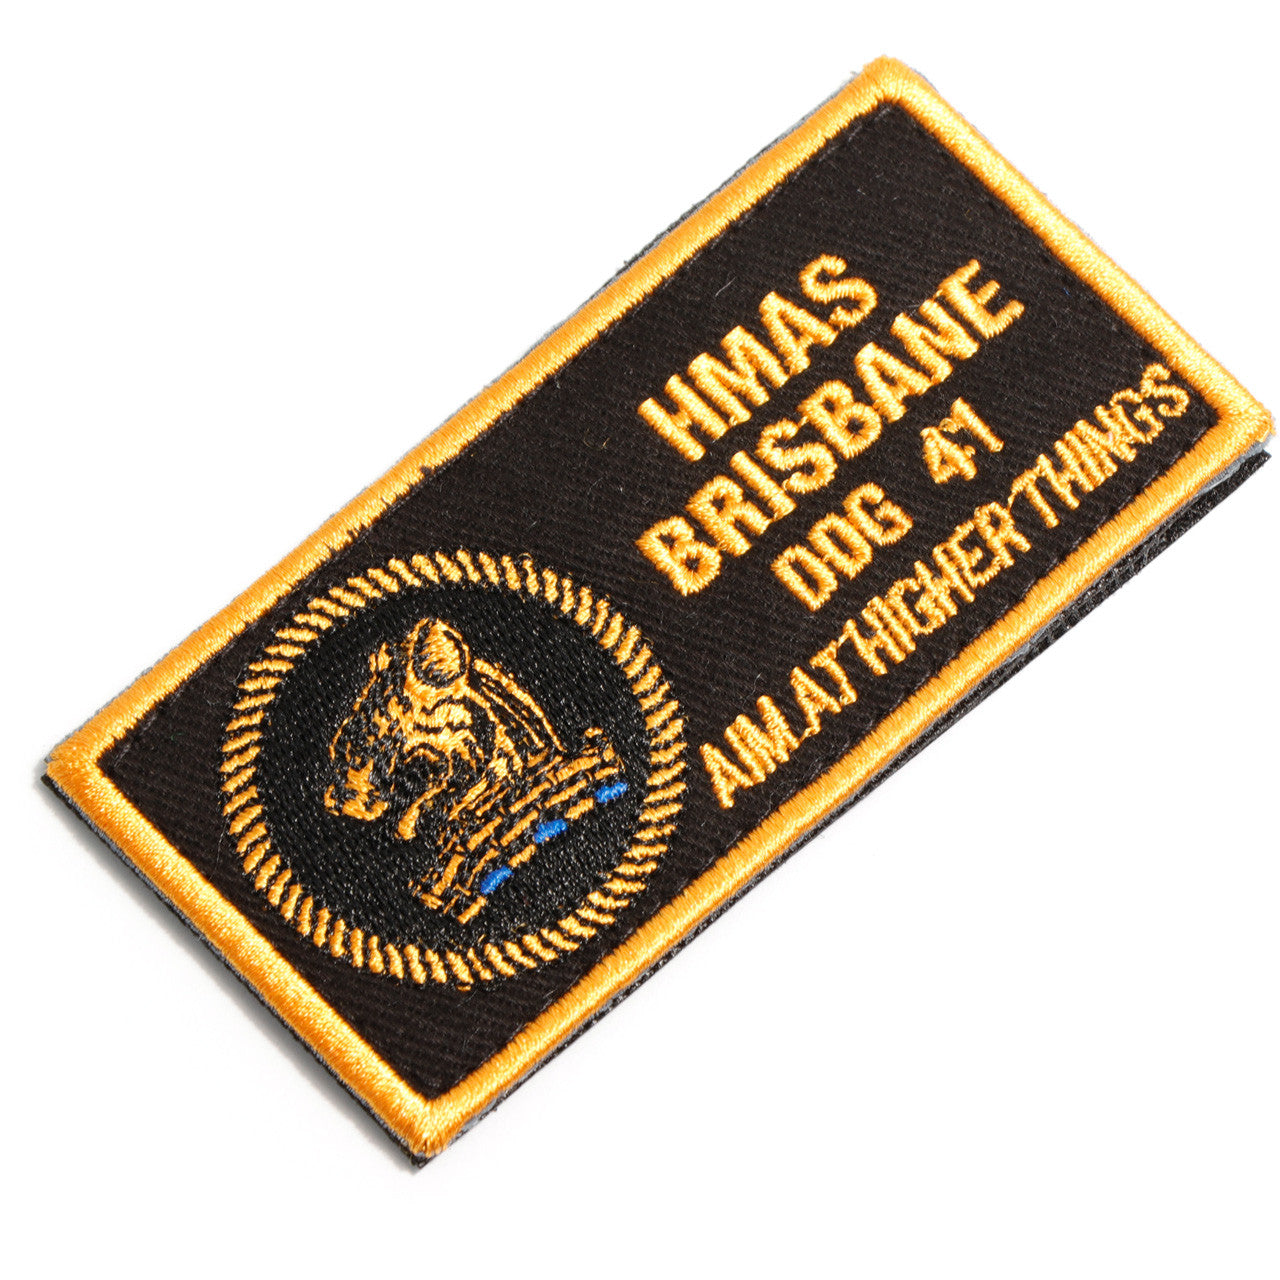 The HMAS Brisbane DPNU Patch is a must-have for all military enthusiasts. This embroidered patch features the iconic HMAS Brisbane design, measuring 100x50mm. With its hook-and-loop backing, it can easily be attached to any garment or accessory. The black and yellow colours add a touch of authenticity to this high-quality patch. Show your support for the HMAS Brisbane with this stylish and durable patch. www.defenceqstore.com.au